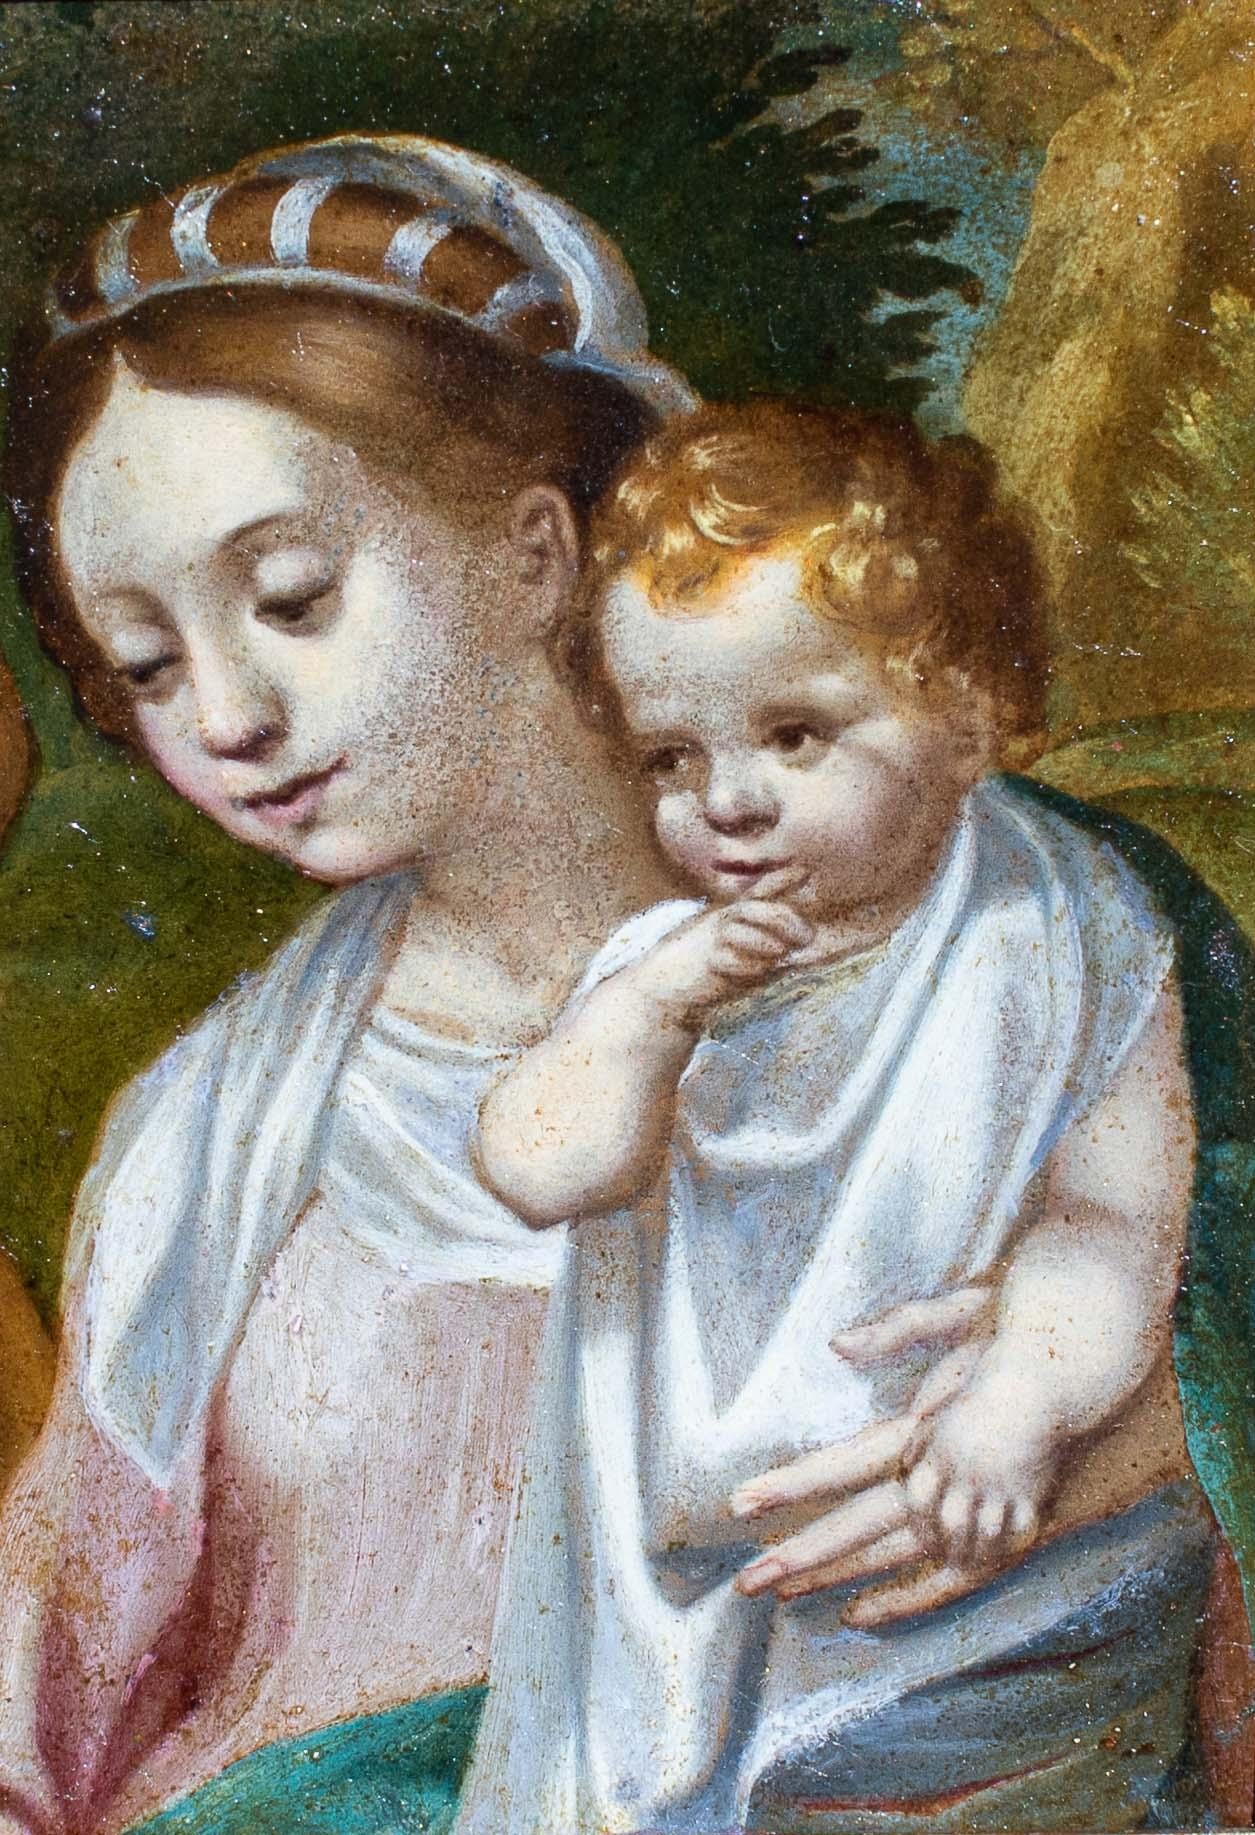 17th century, Italian school
Madonna with Child
Oil on copper, 14.5 x 10 cm - with frame 21.5 x 17 cm

This oil on copper, with its delicate and muted tones, offers a rare point of view. The artist has enclosed the Virgin and the Son in a